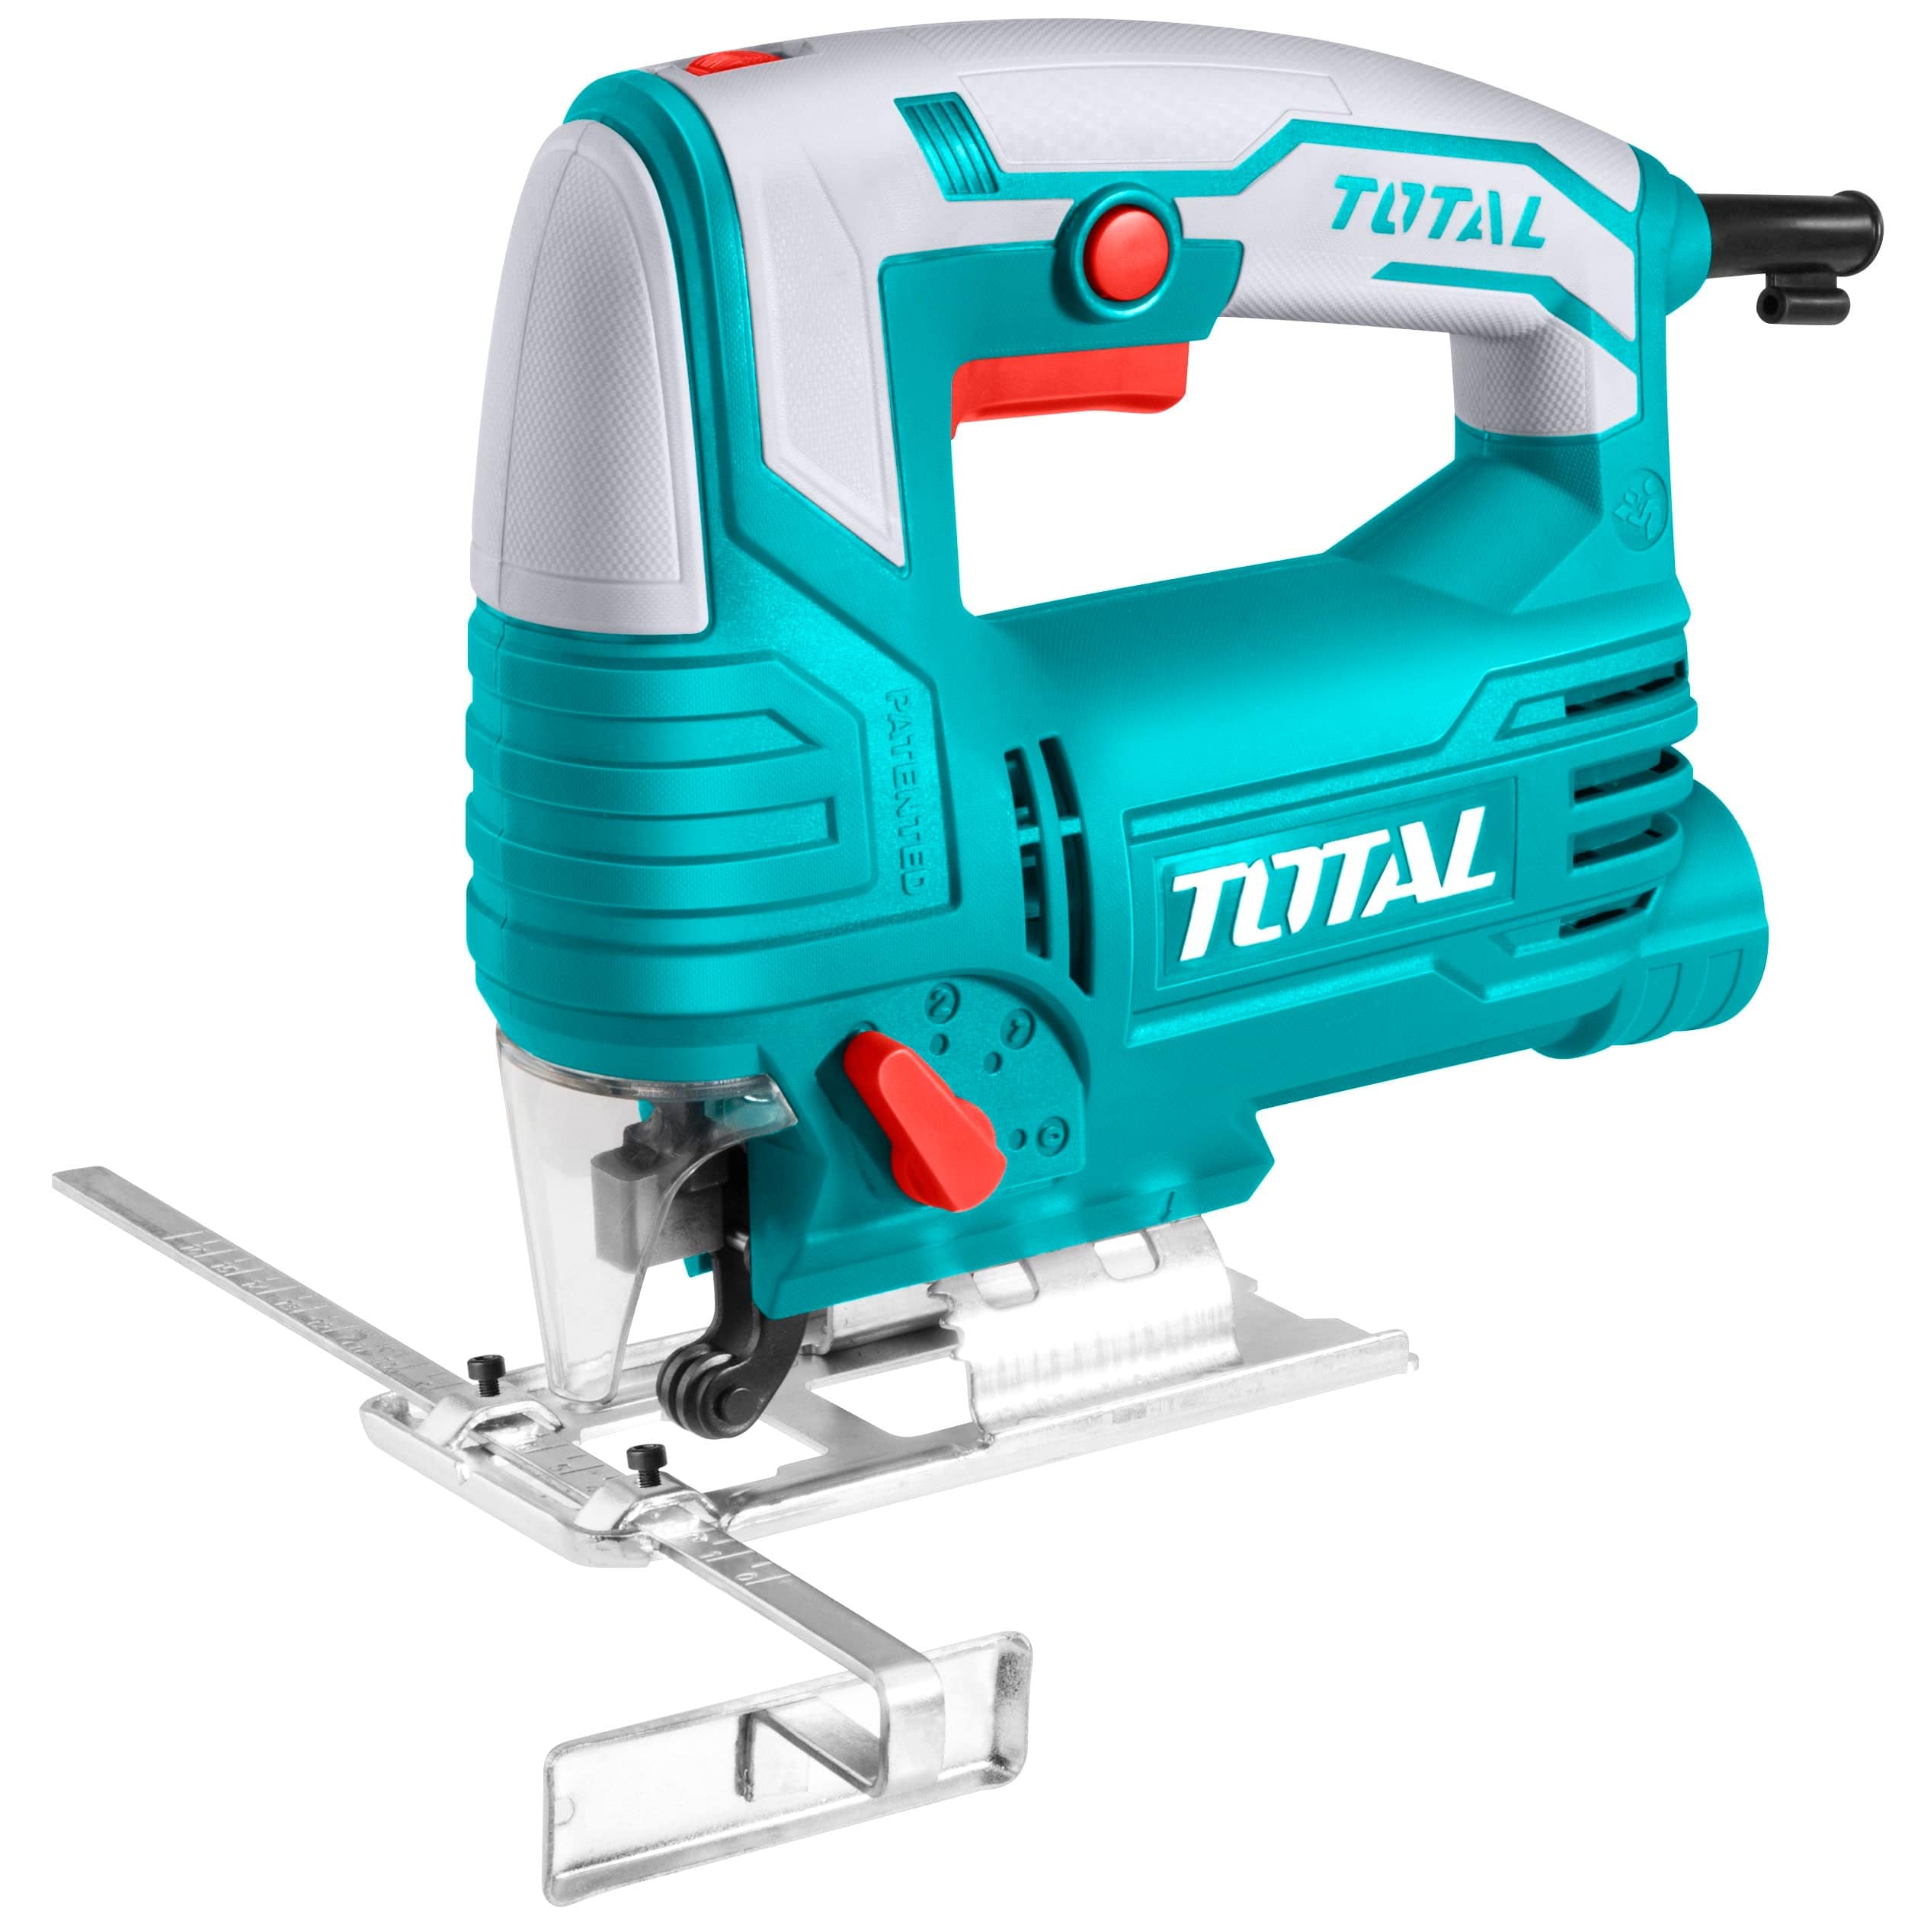 Total Jig Saw 570W - TS206656 | Supply Master | Accra, Ghana Jigsaw Buy Tools hardware Building materials